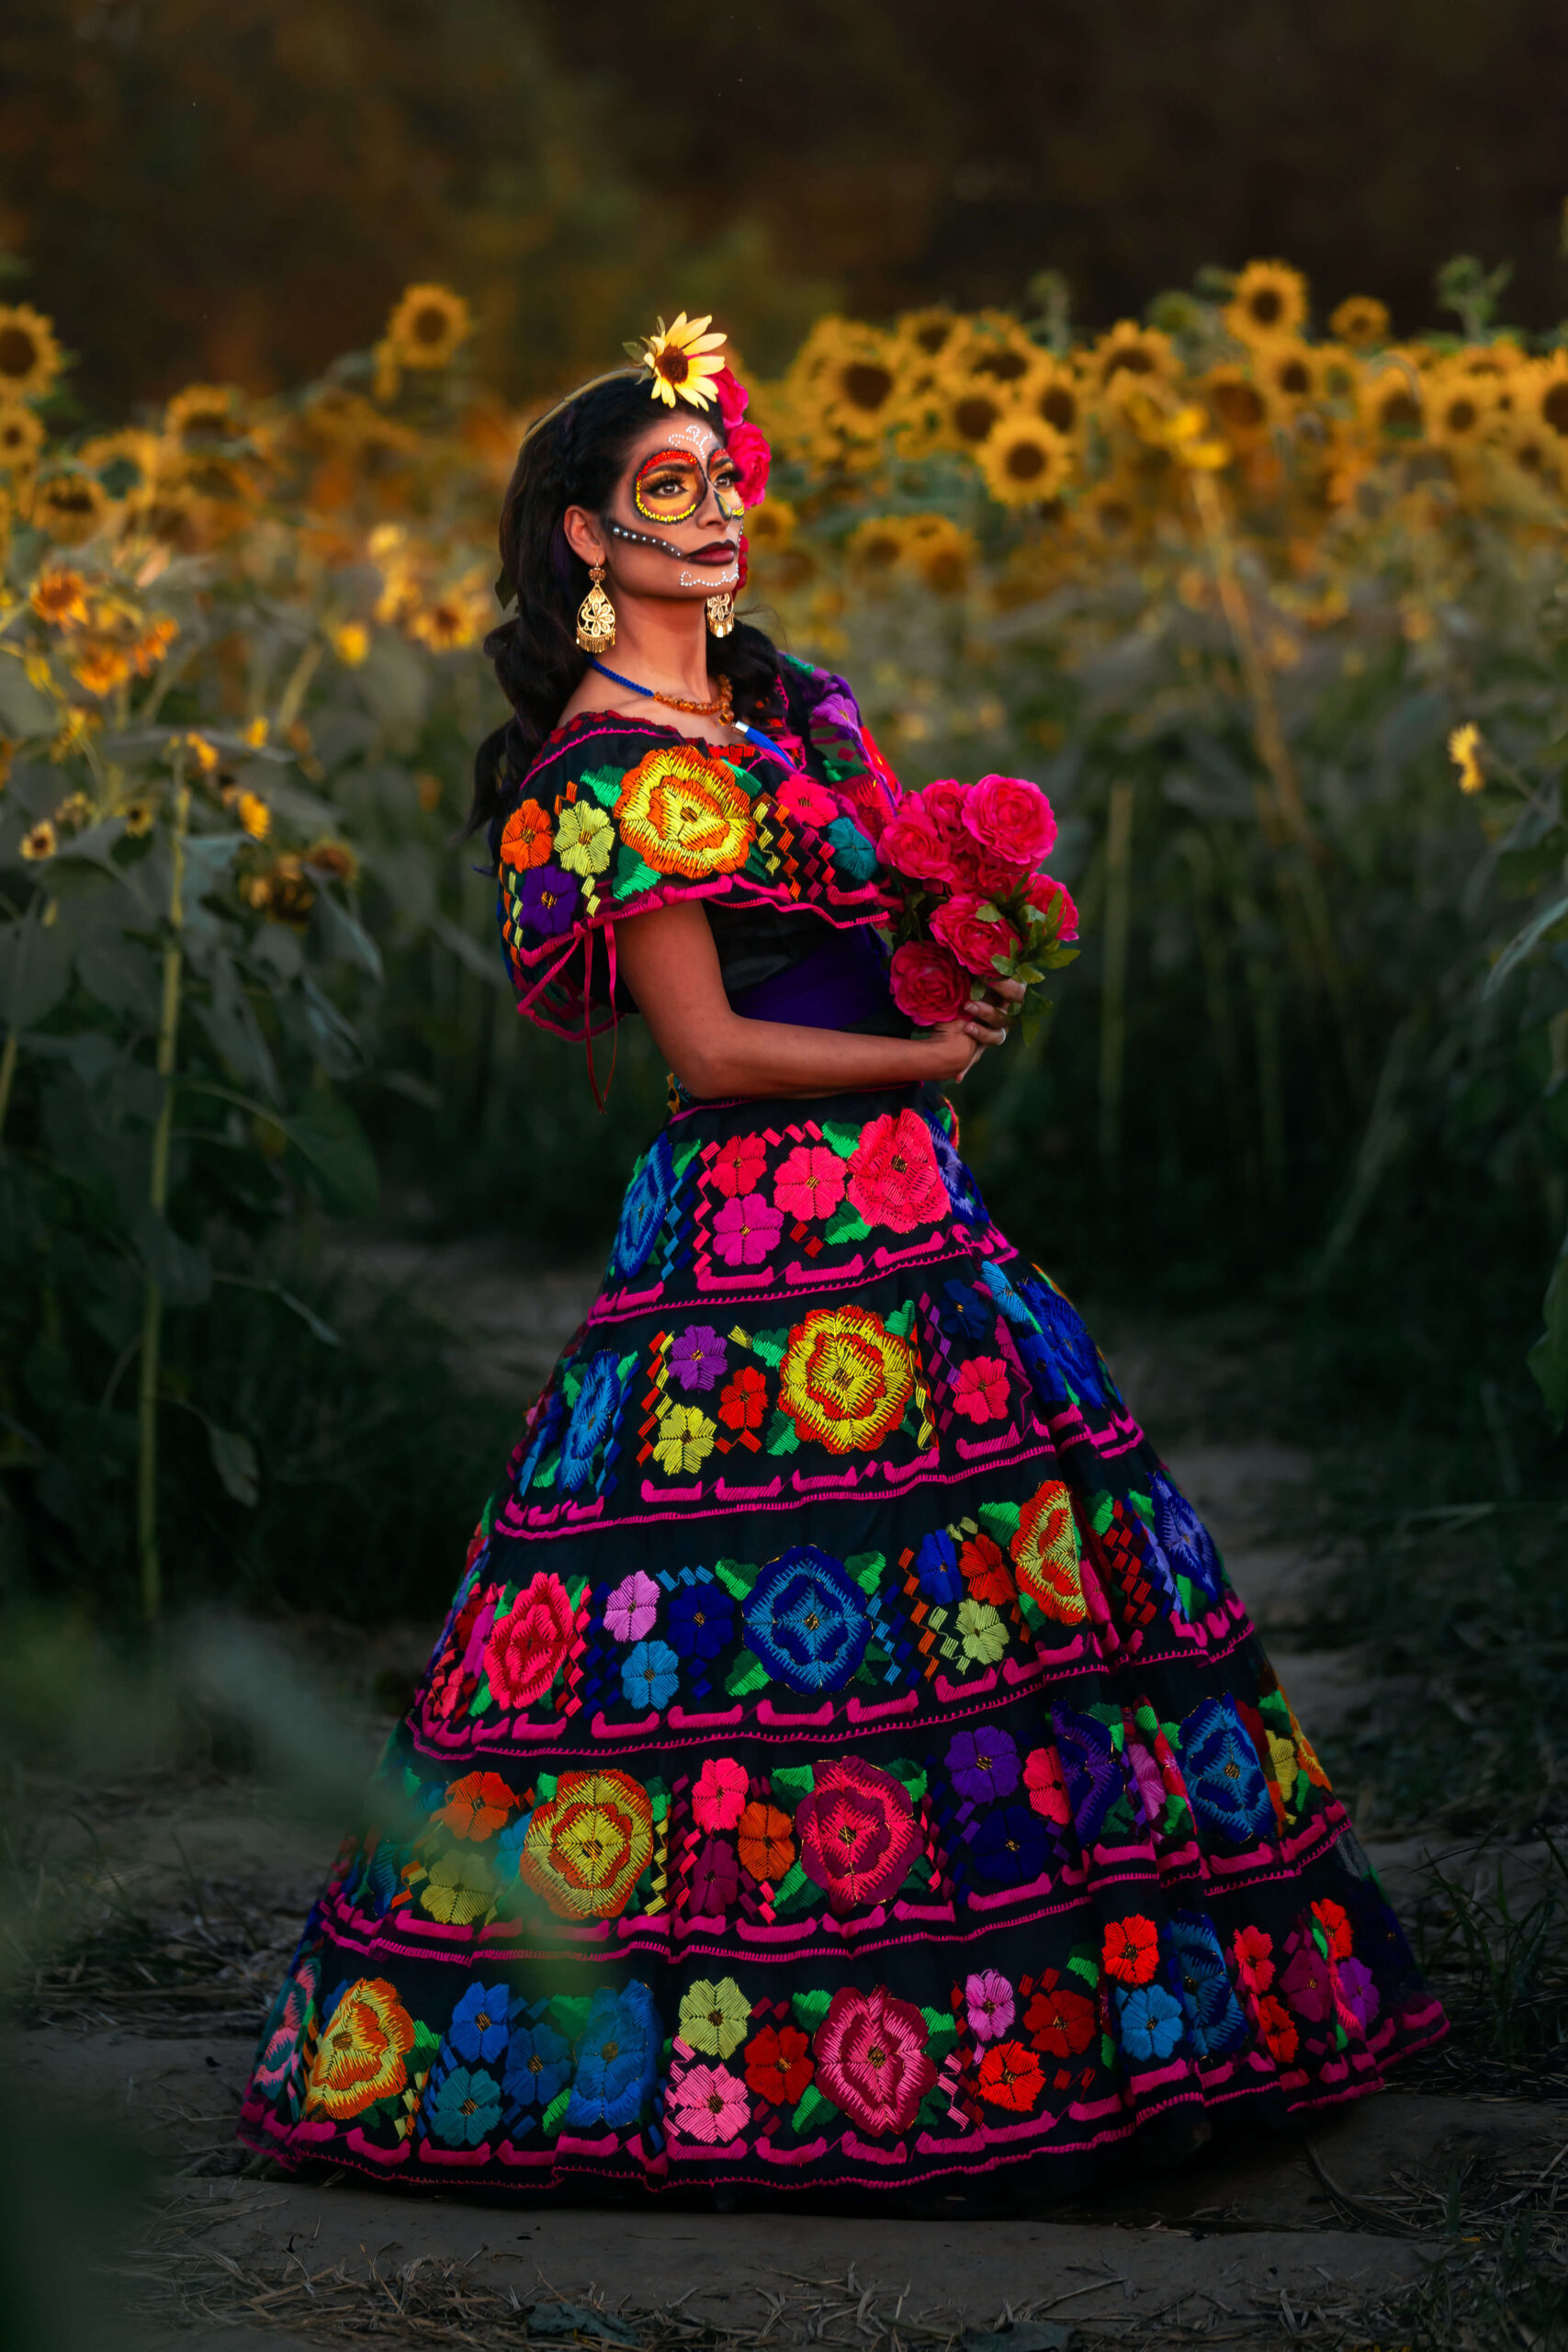 Dark haired lady wearing colorful dress and posing with flowers for Houston obgyn.